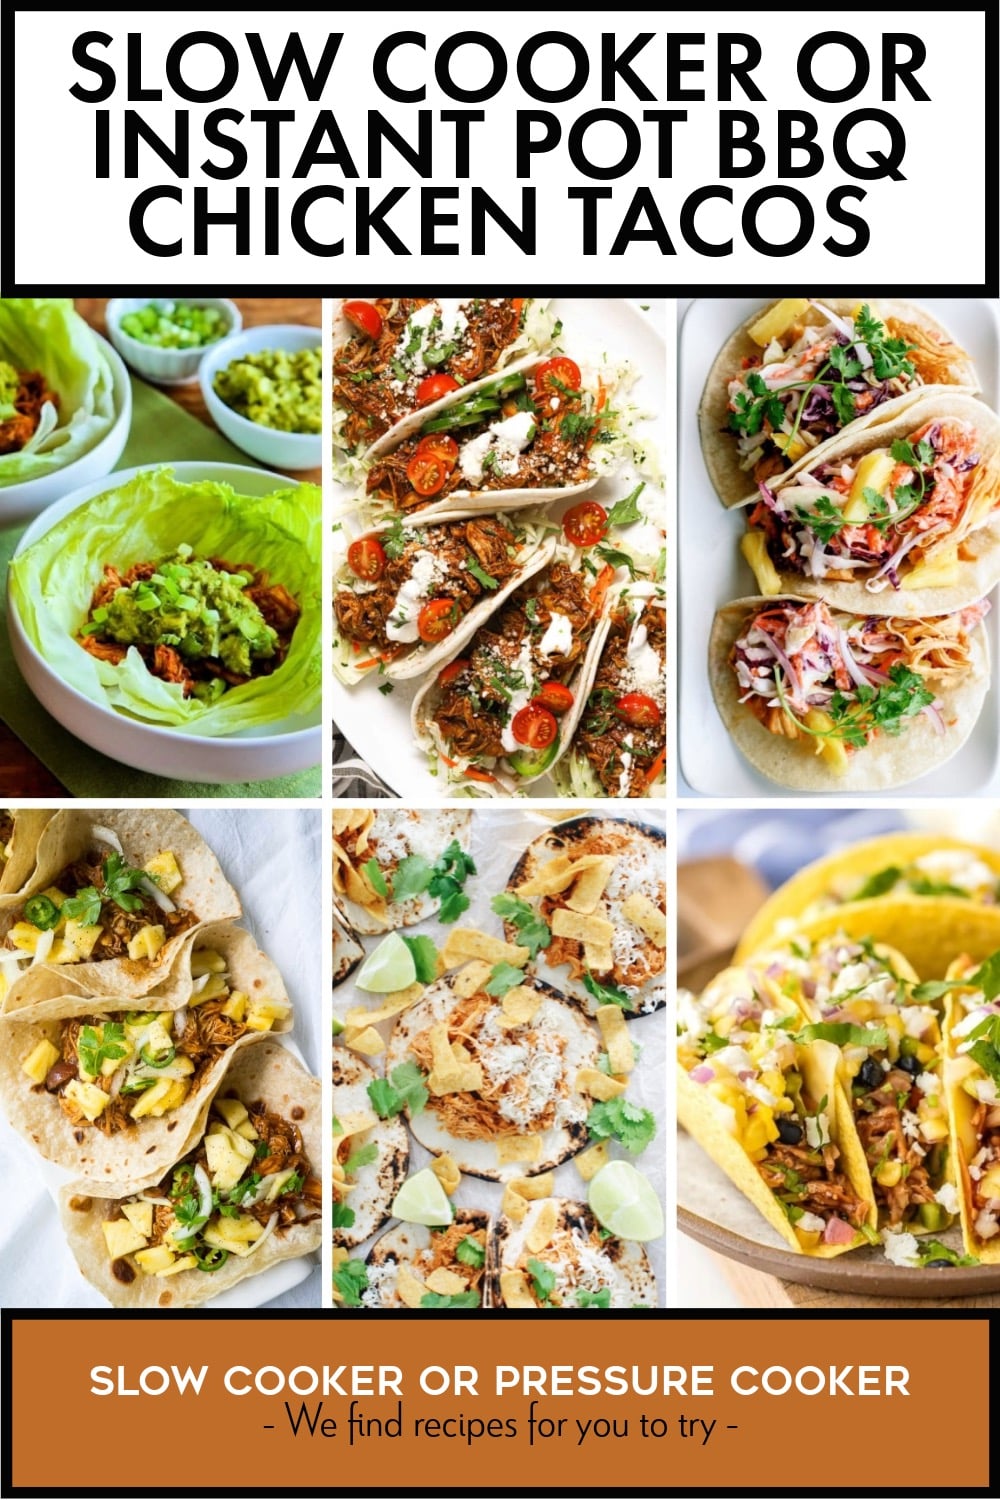 Pinterest image of Slow Cooker or Instant Pot BBQ Chicken Tacos